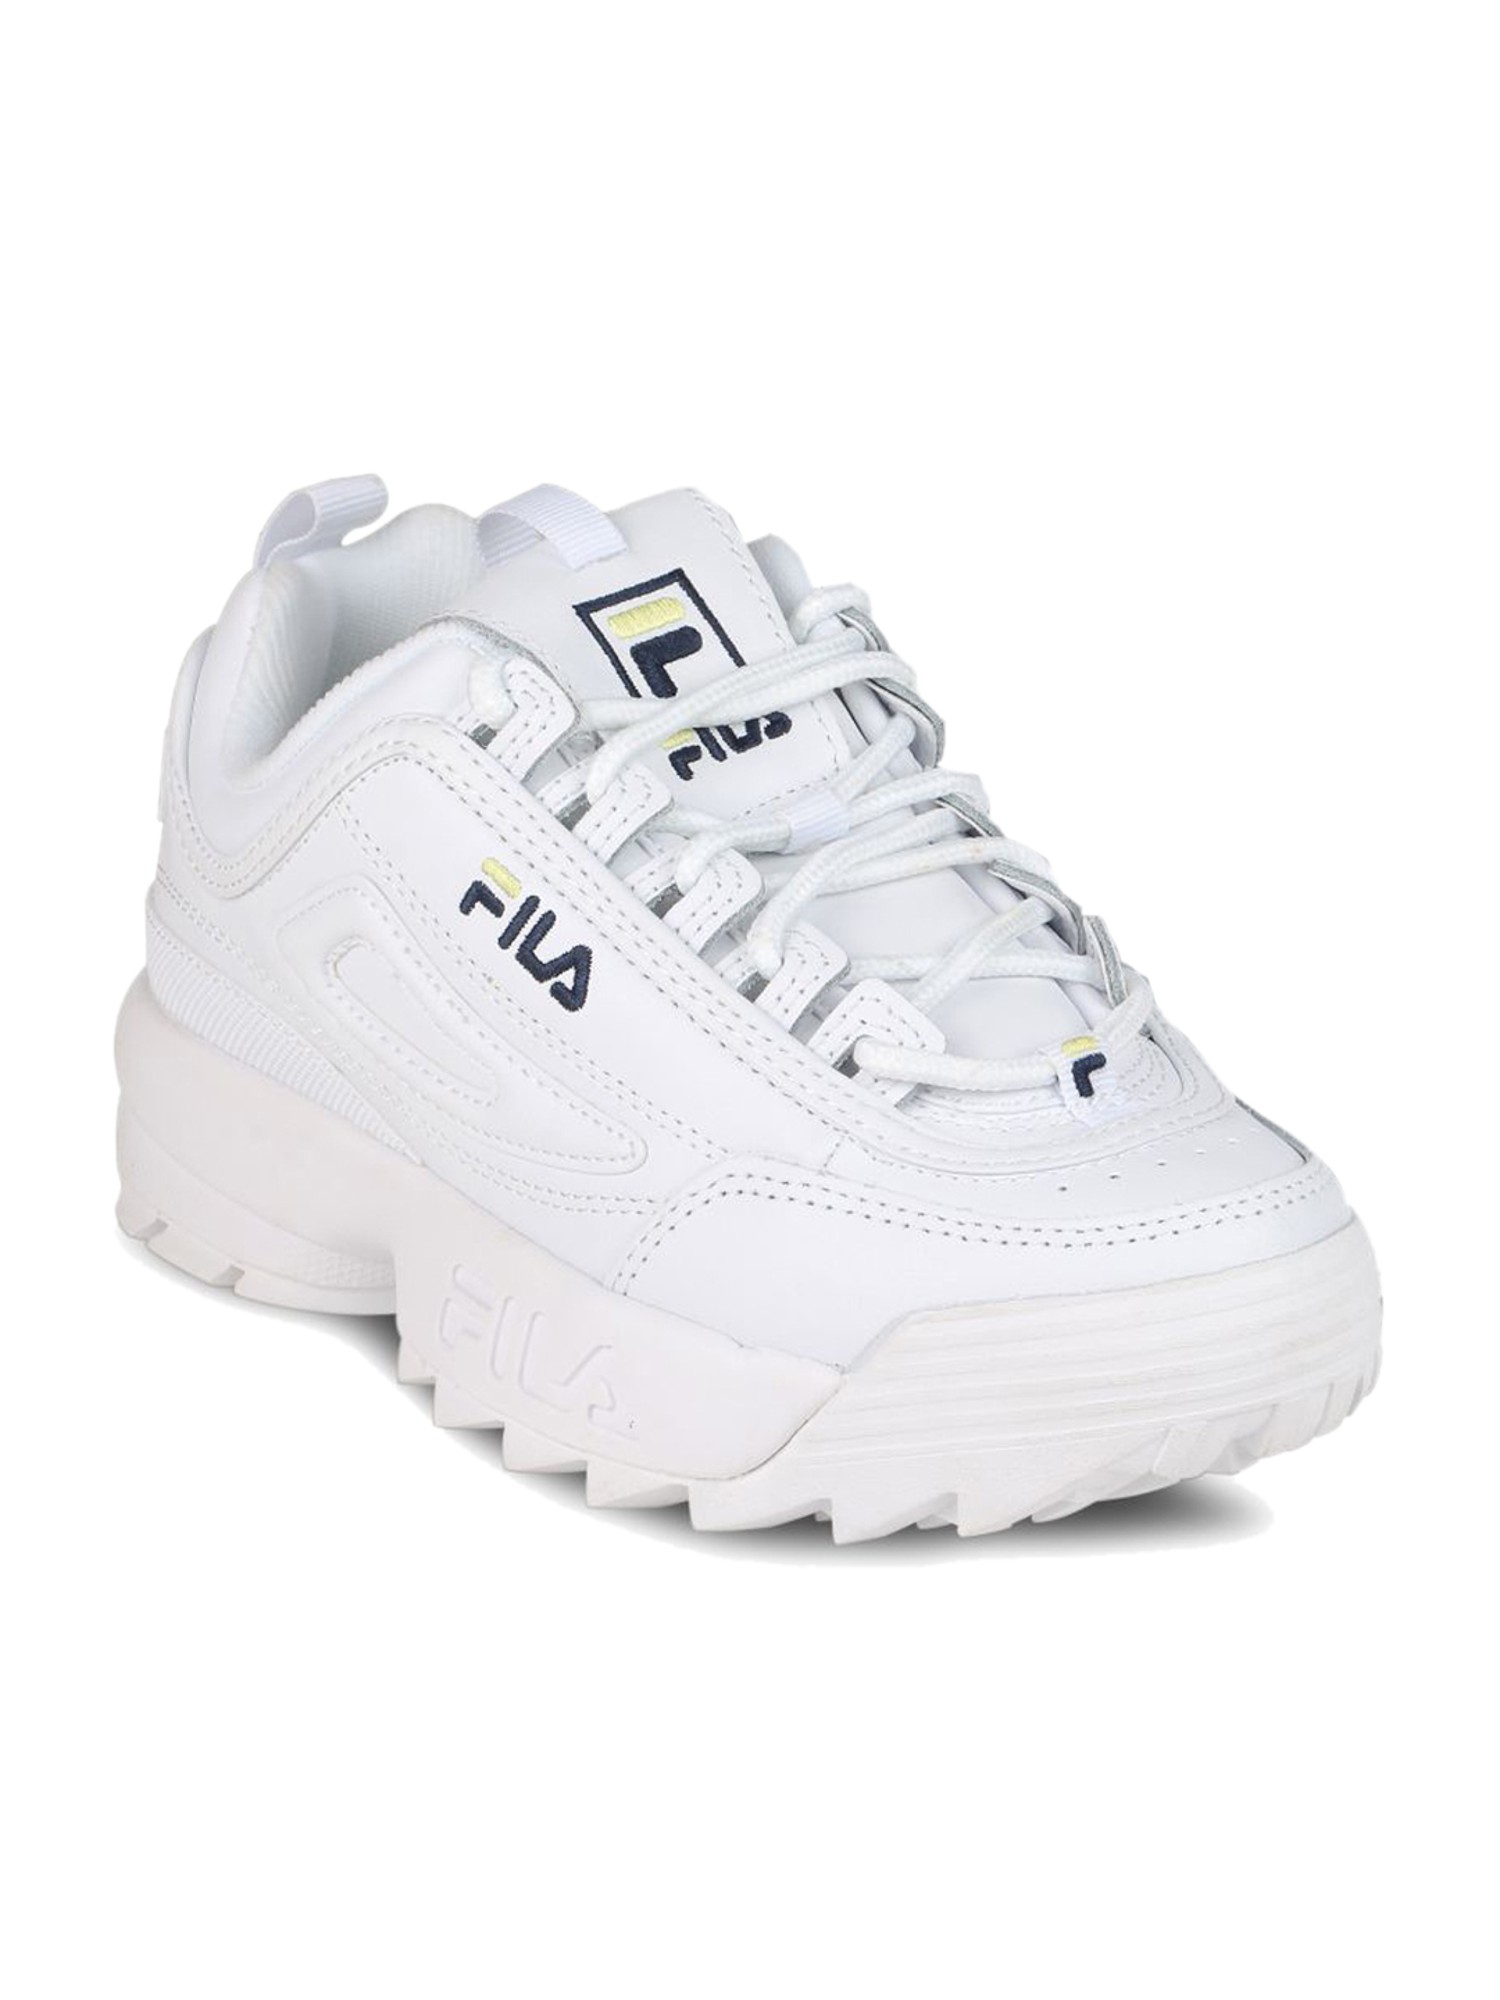 Share 266+ fila white sneakers shoes best